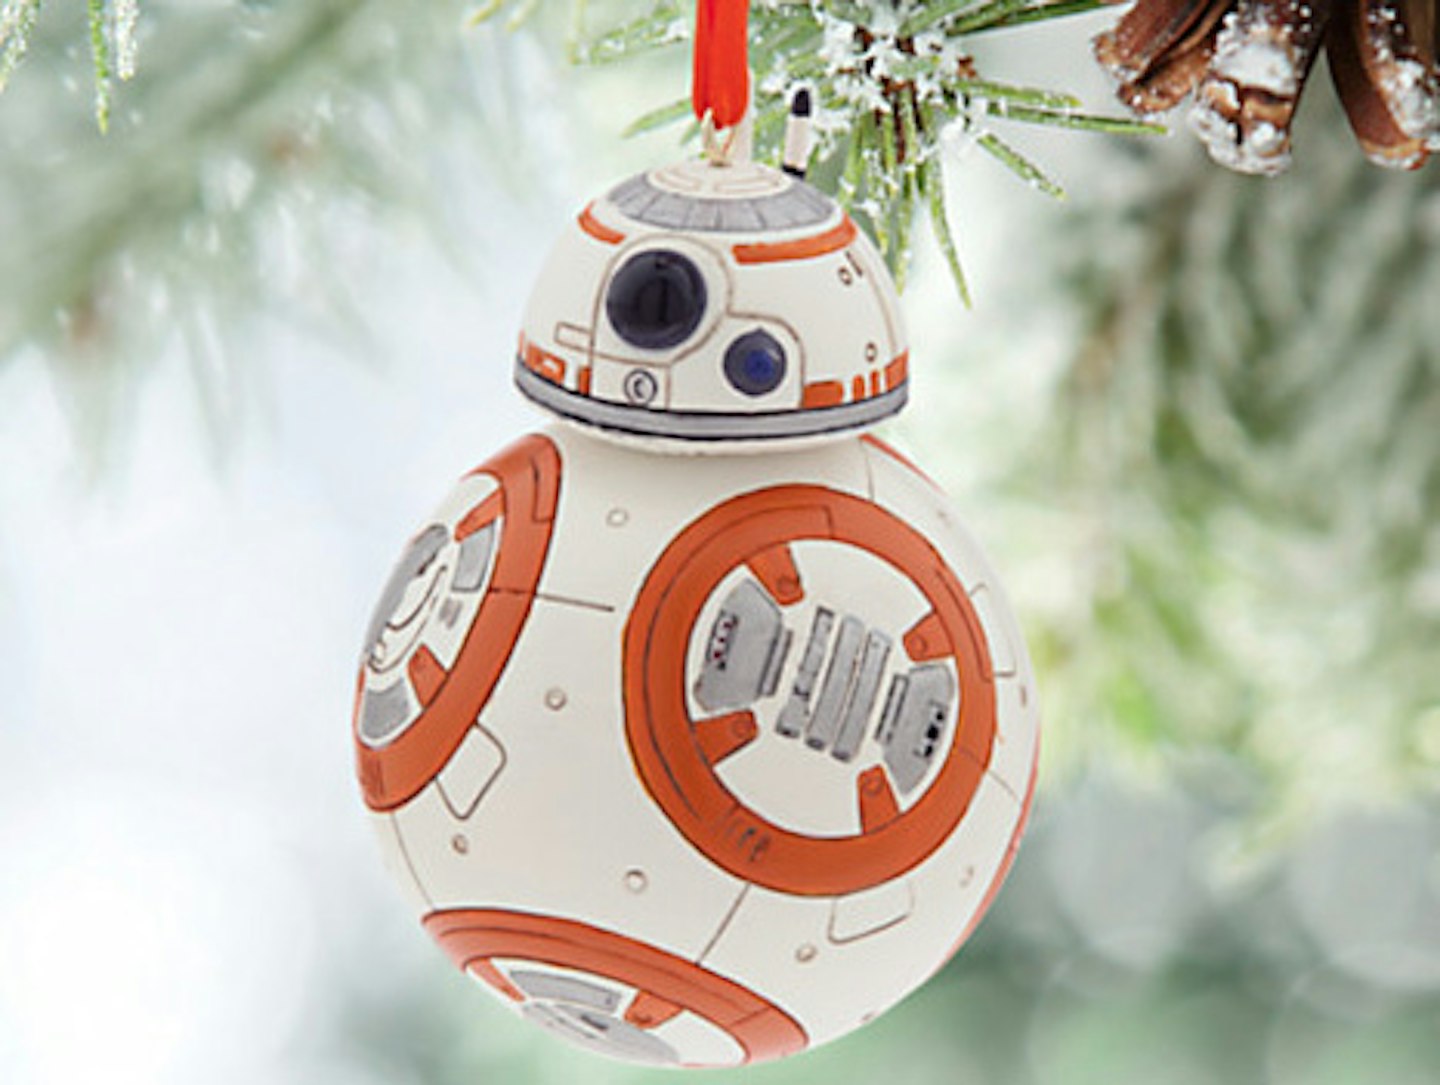 Star Wars holiday decor: Yoda, R2-D2, BB-8, and more festive finds